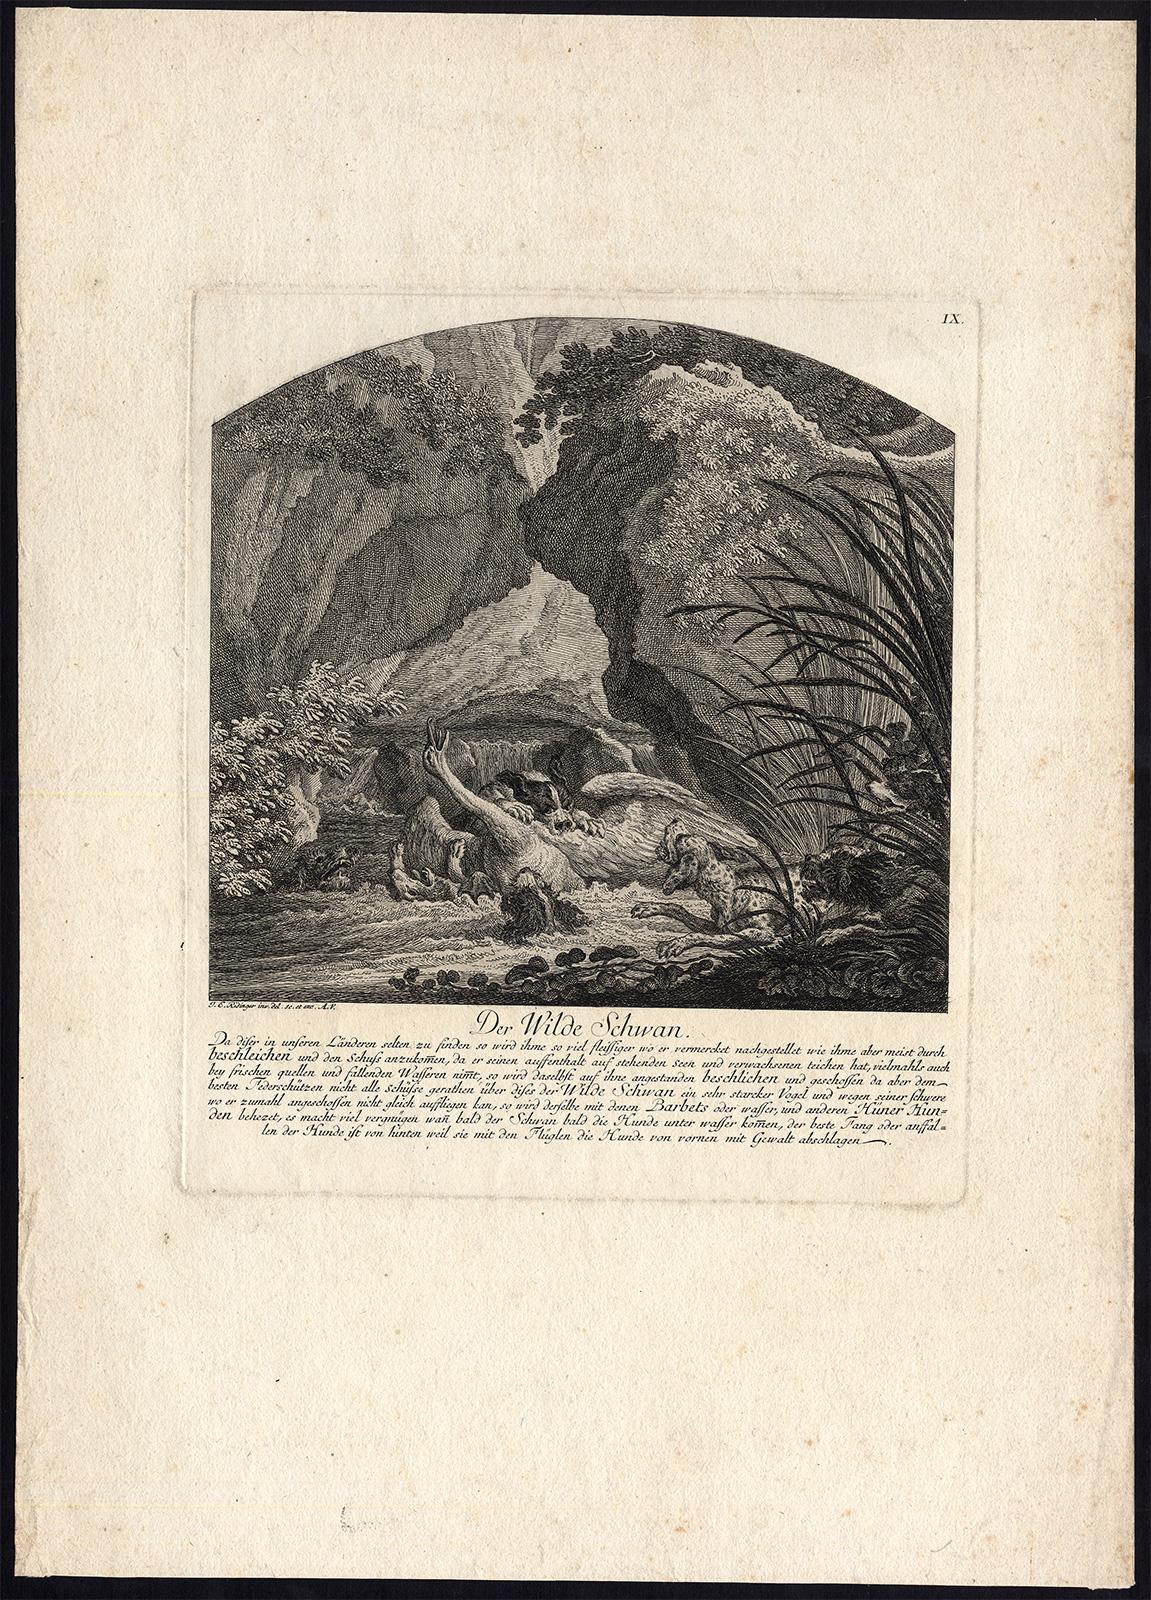 Hunting scene with a swan surrounded by dogs by Ridinger - Engraving - 18th c - Print by Martin Elias Ridinger